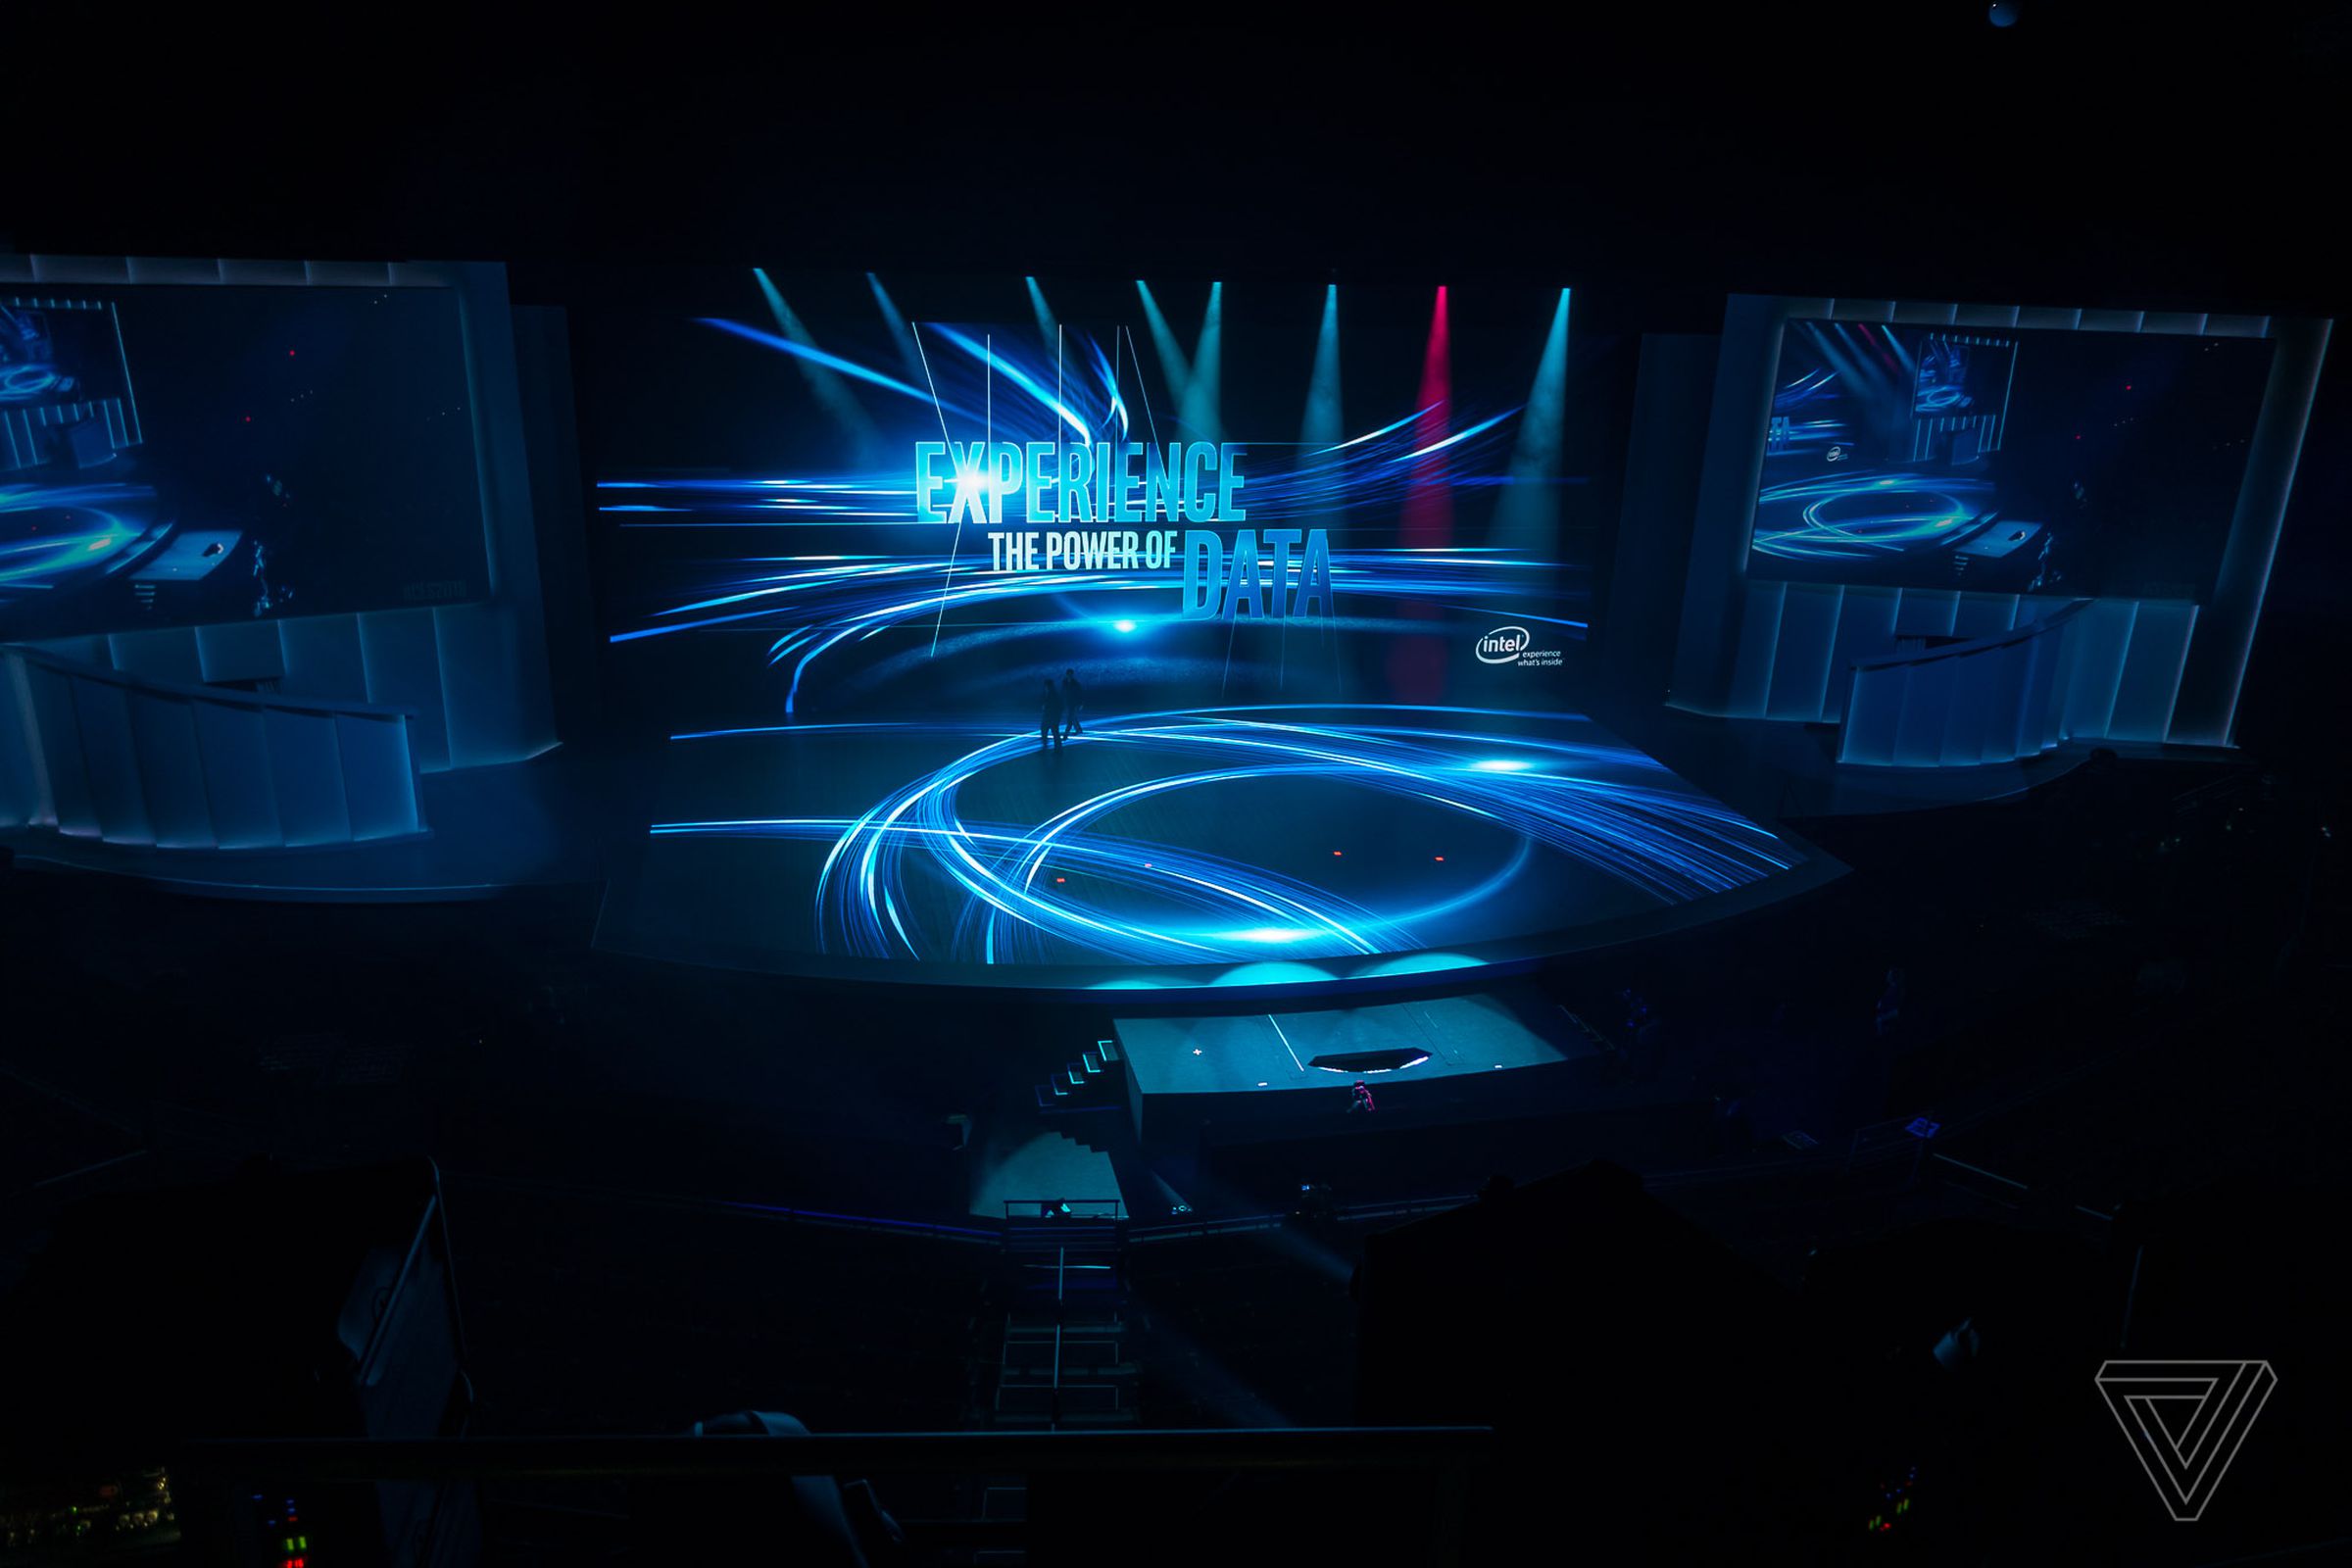 Intel’s tagline for the keynote: “Experience the power of data.”